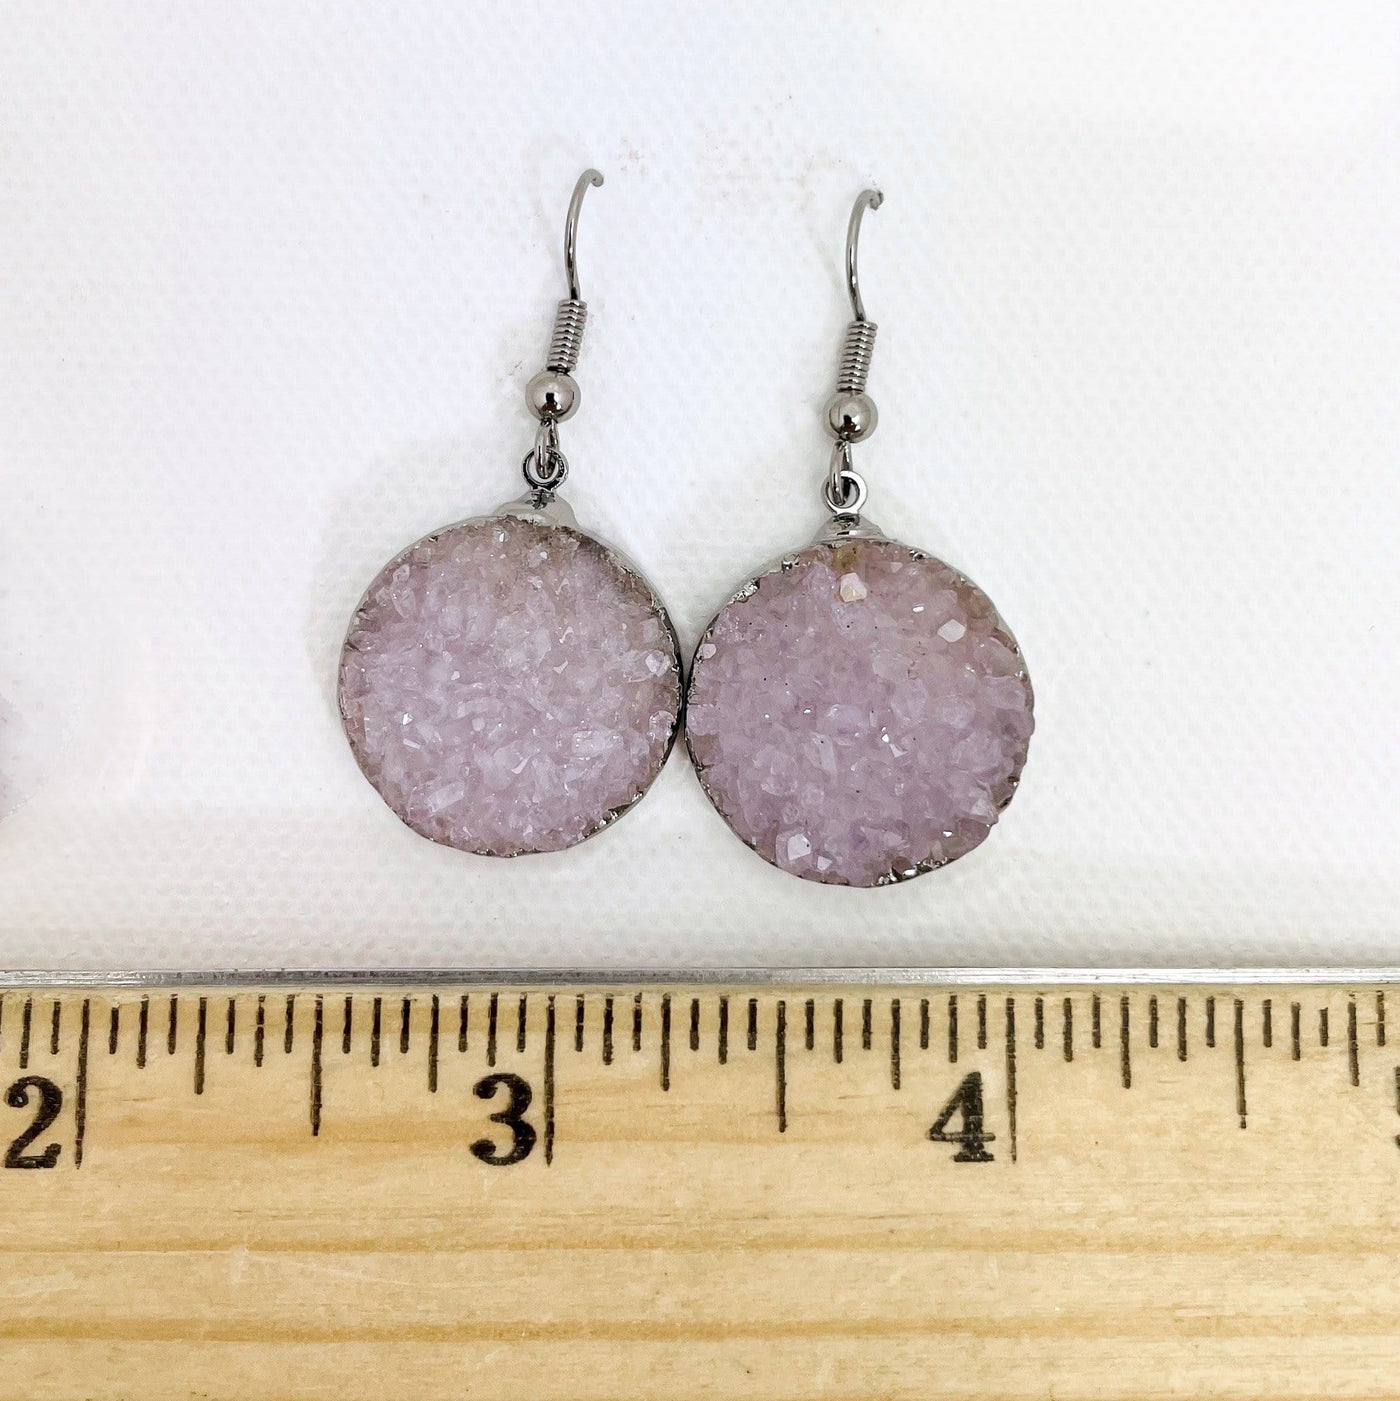 White druzy earrings on a white background next to a wooden ruler.  Each earring is approximately 3 fourths of an inch in diameter.